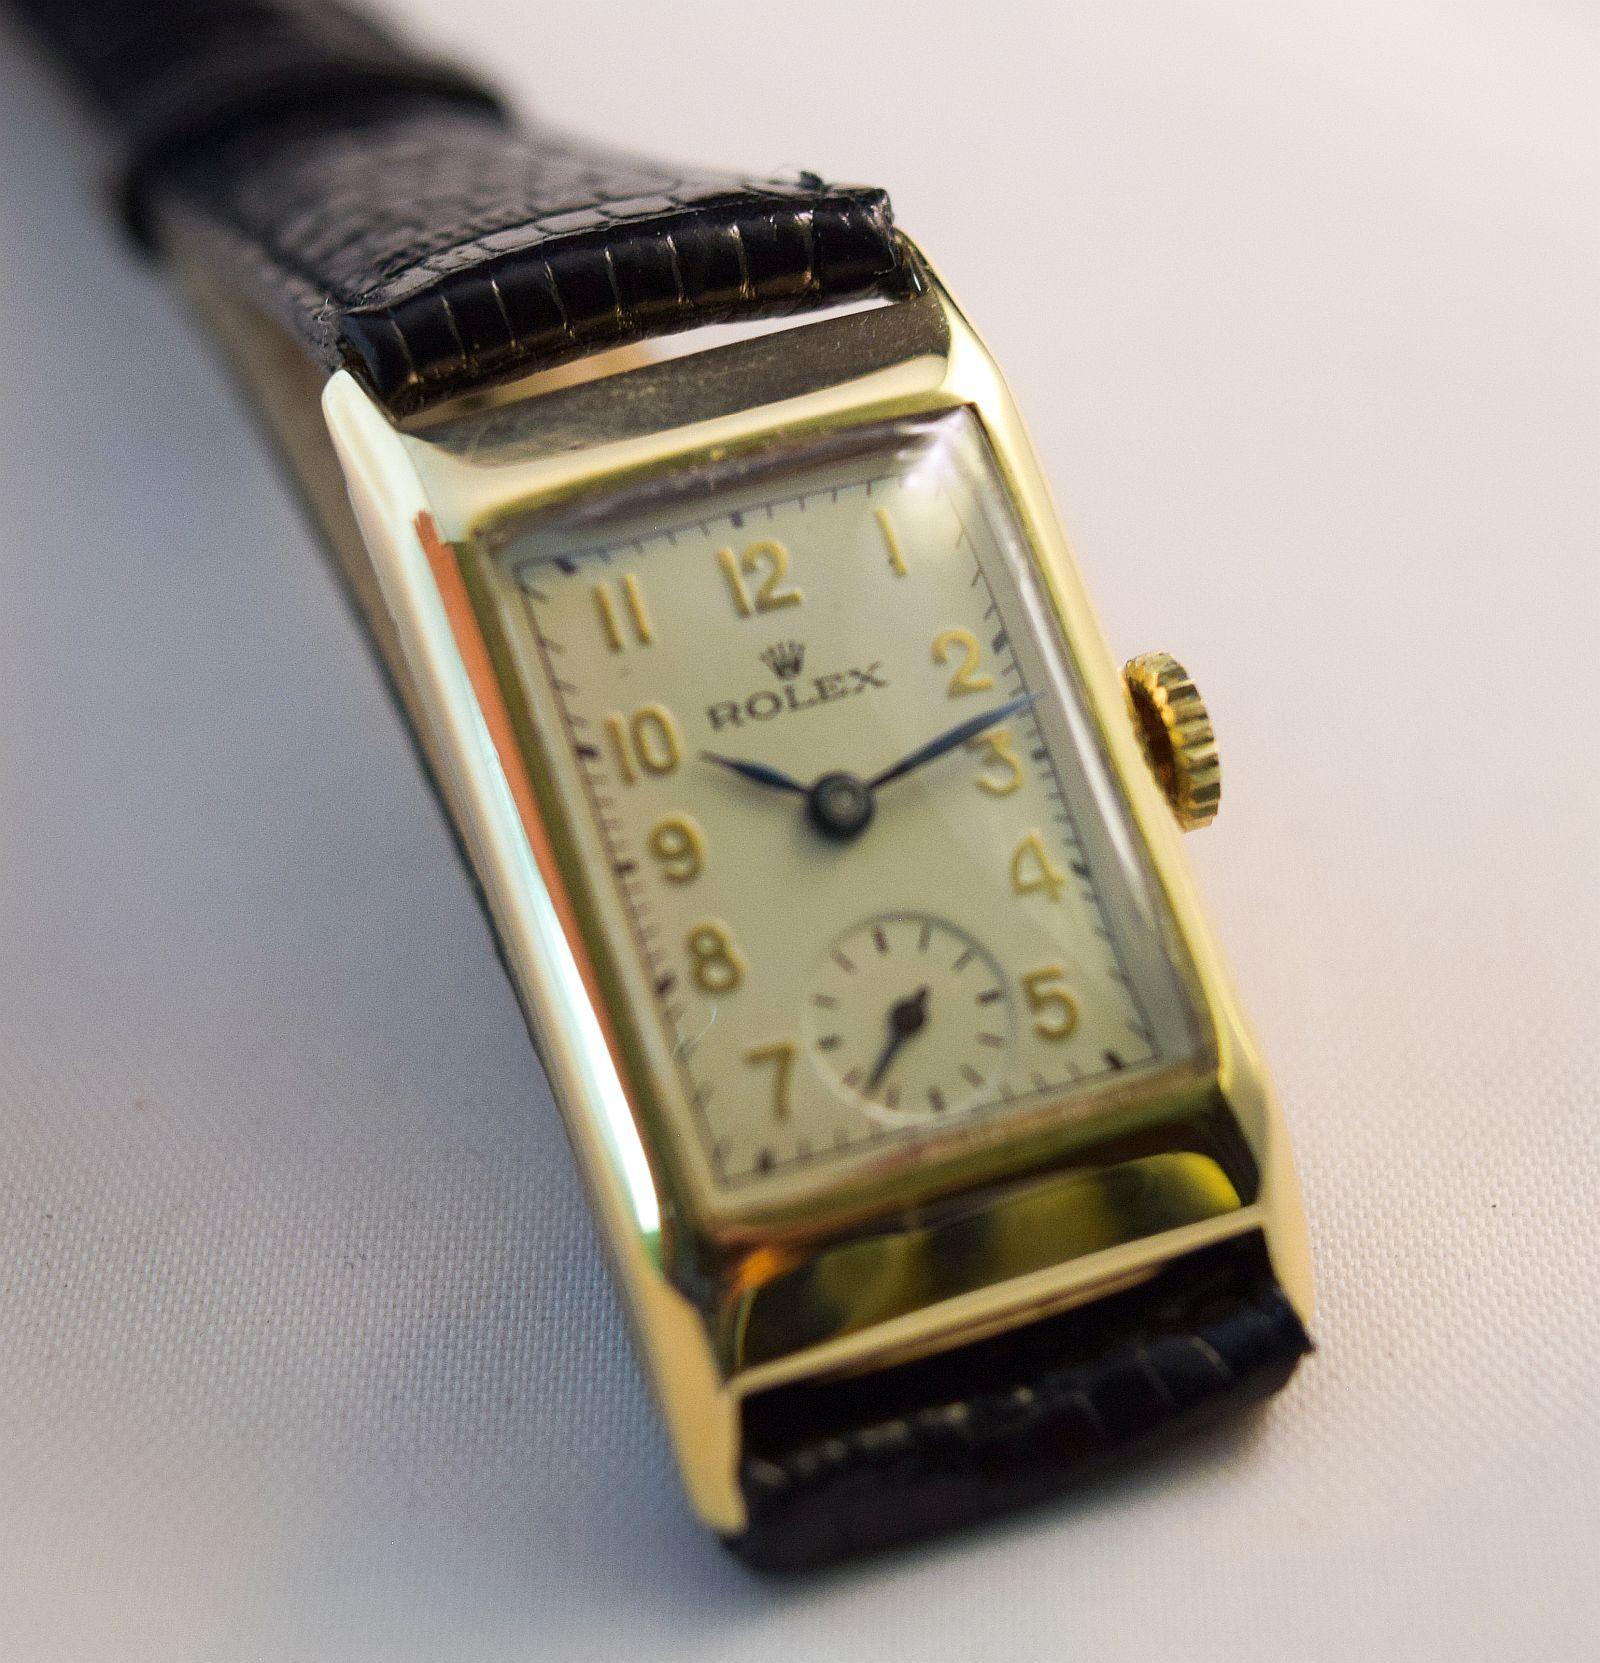 Rolex Ref 2356 Circa 1930
Rolex Vintage Rectangular solid gold case with solid wire gold fixed lugs.
This attractive watch is manual hand winding.
Excellent condition it has been recently serviced-cleaned-restored from top to bottom by competent